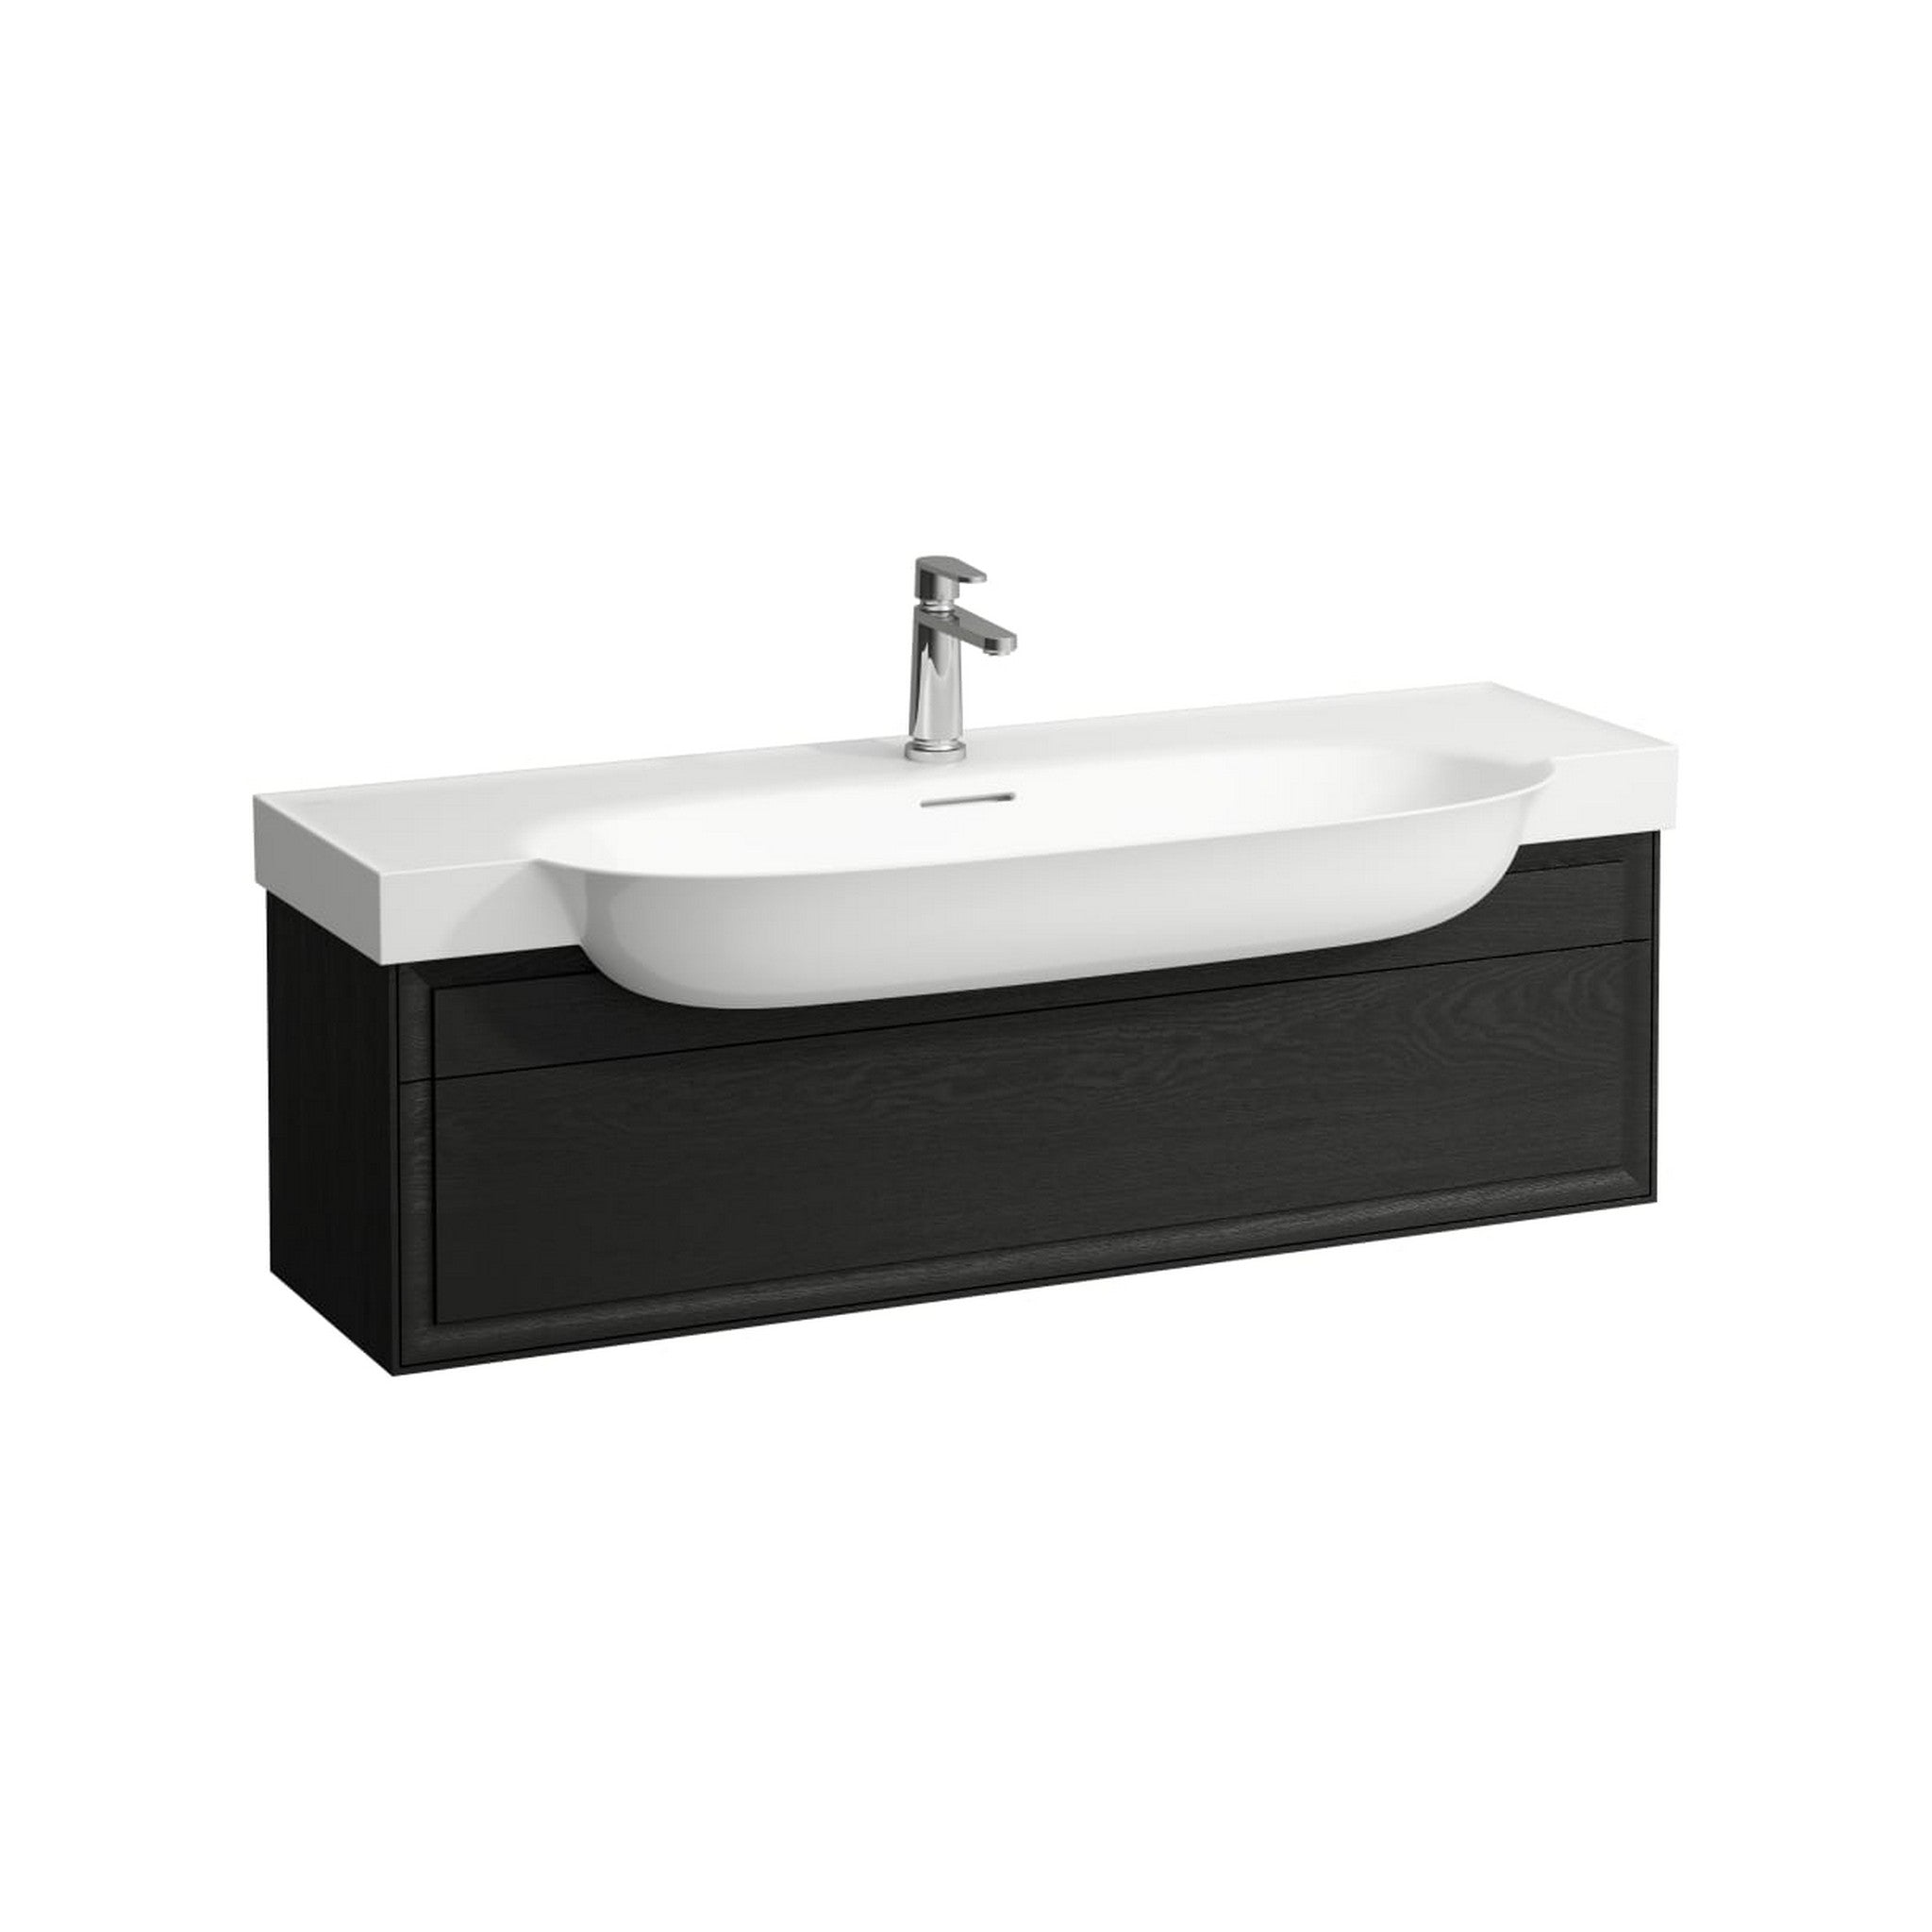 Laufen, Laufen New Classic 46" 1-Drawer Blacked Oak Wall-Mounted Vanity for New Classic Bathroom Sink Model: H813858